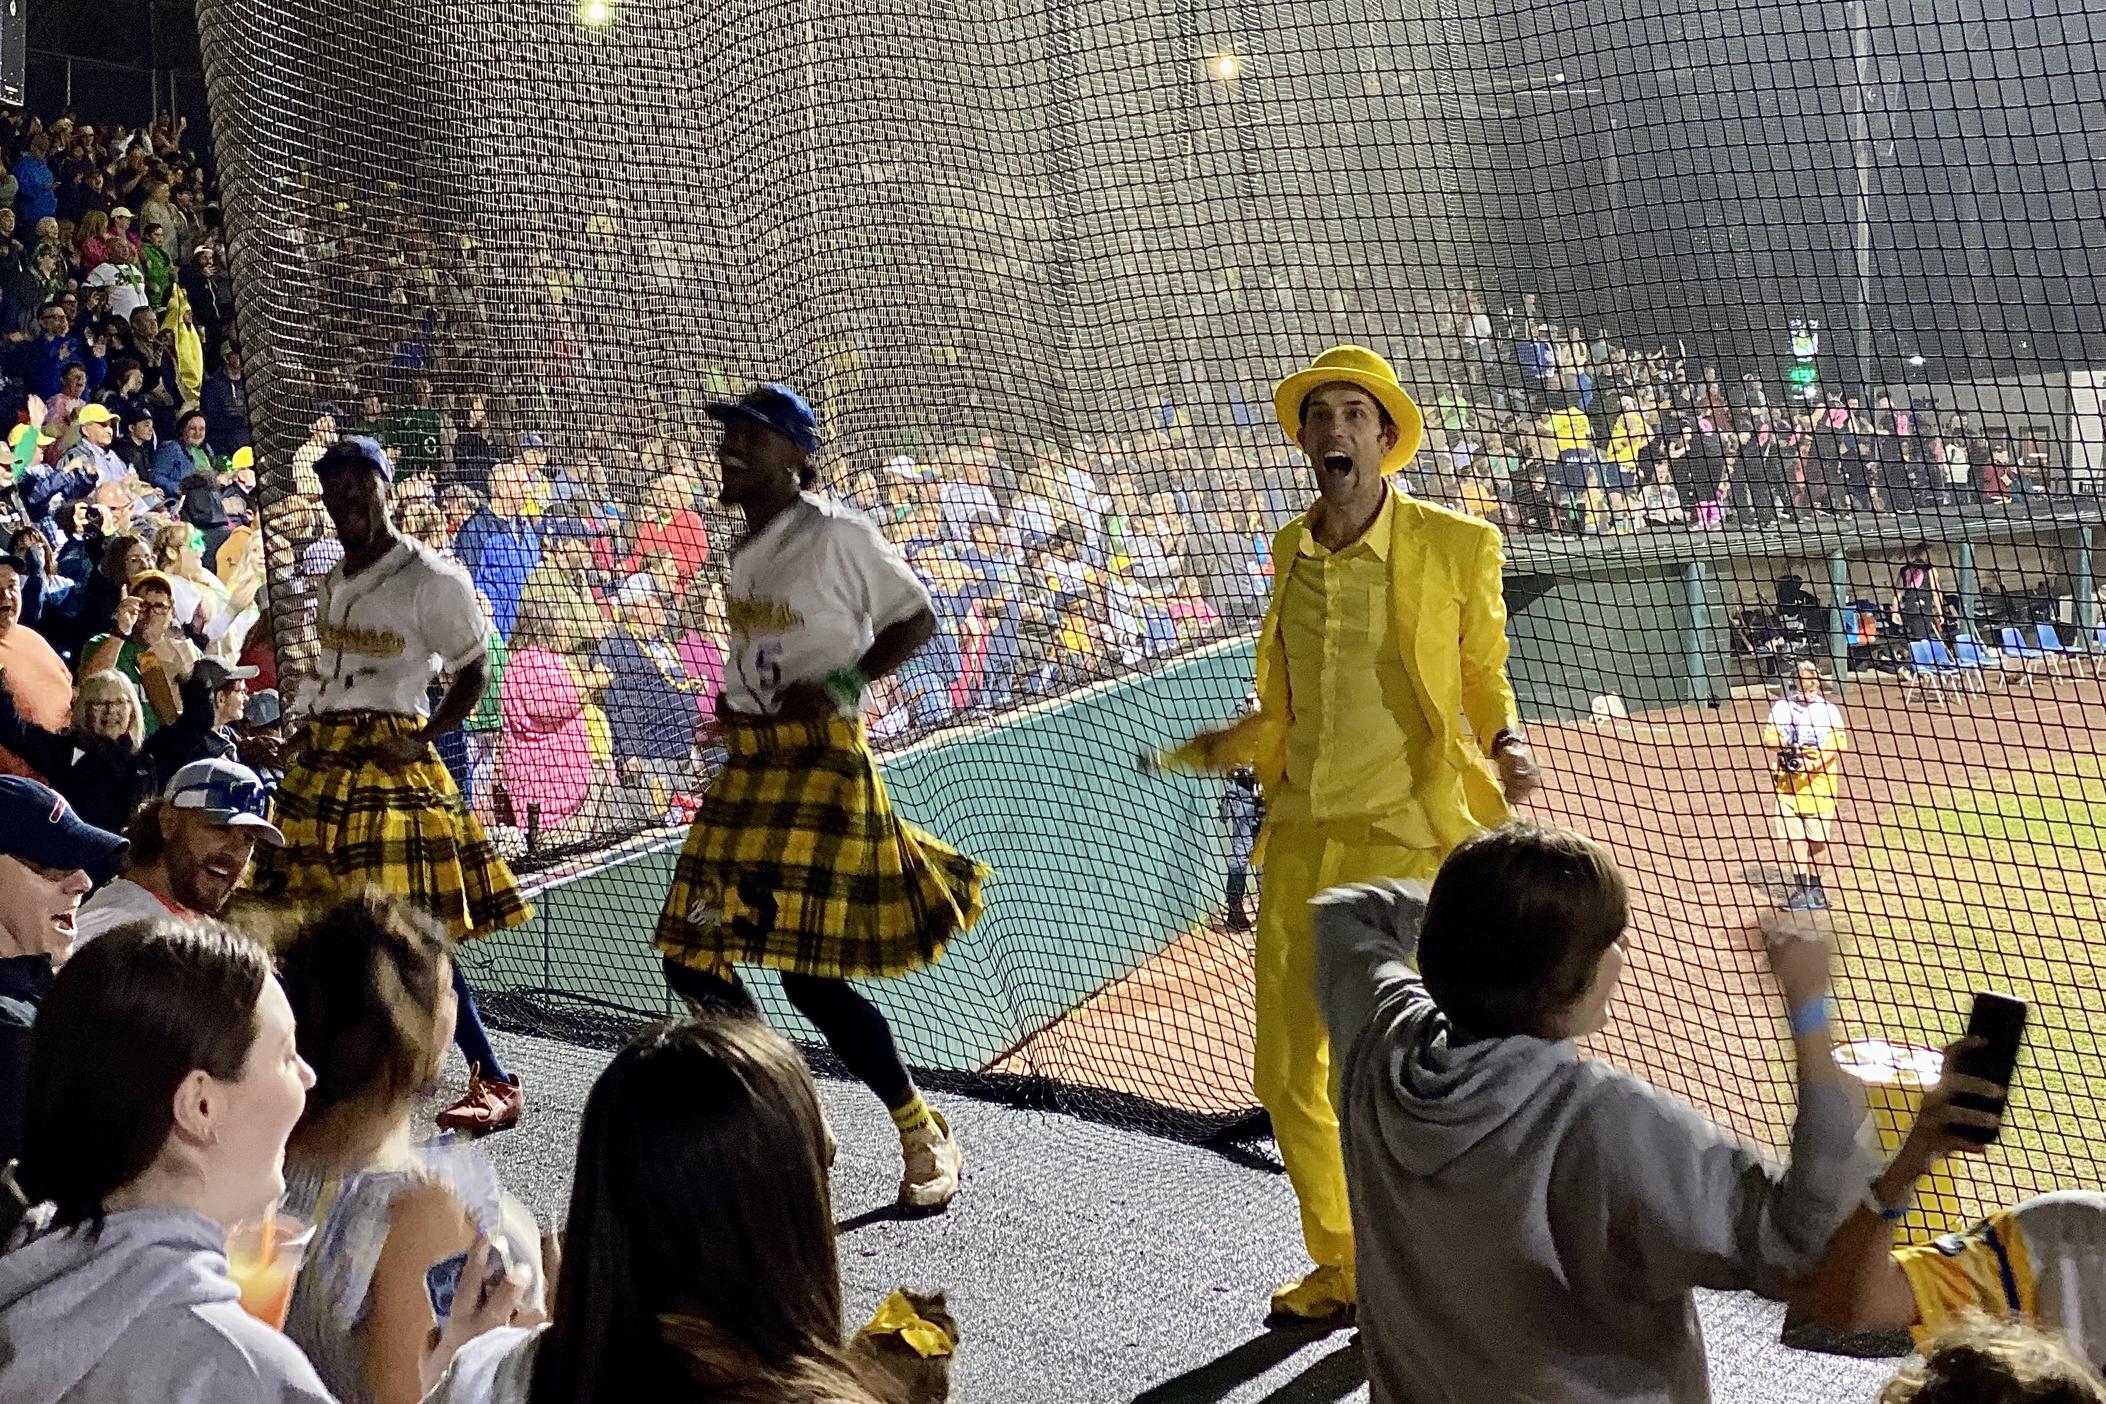 Wearing his signature yellow tuxedo, Savannah Bananas owner Jesse Cole dances with players and fans in between innings at Grayson Stadium. Cole and two players are dancing on top of the home dugout. The players are wearing kilts with a yellow-and-black plaid pattern, in addition to their white home uniforms.